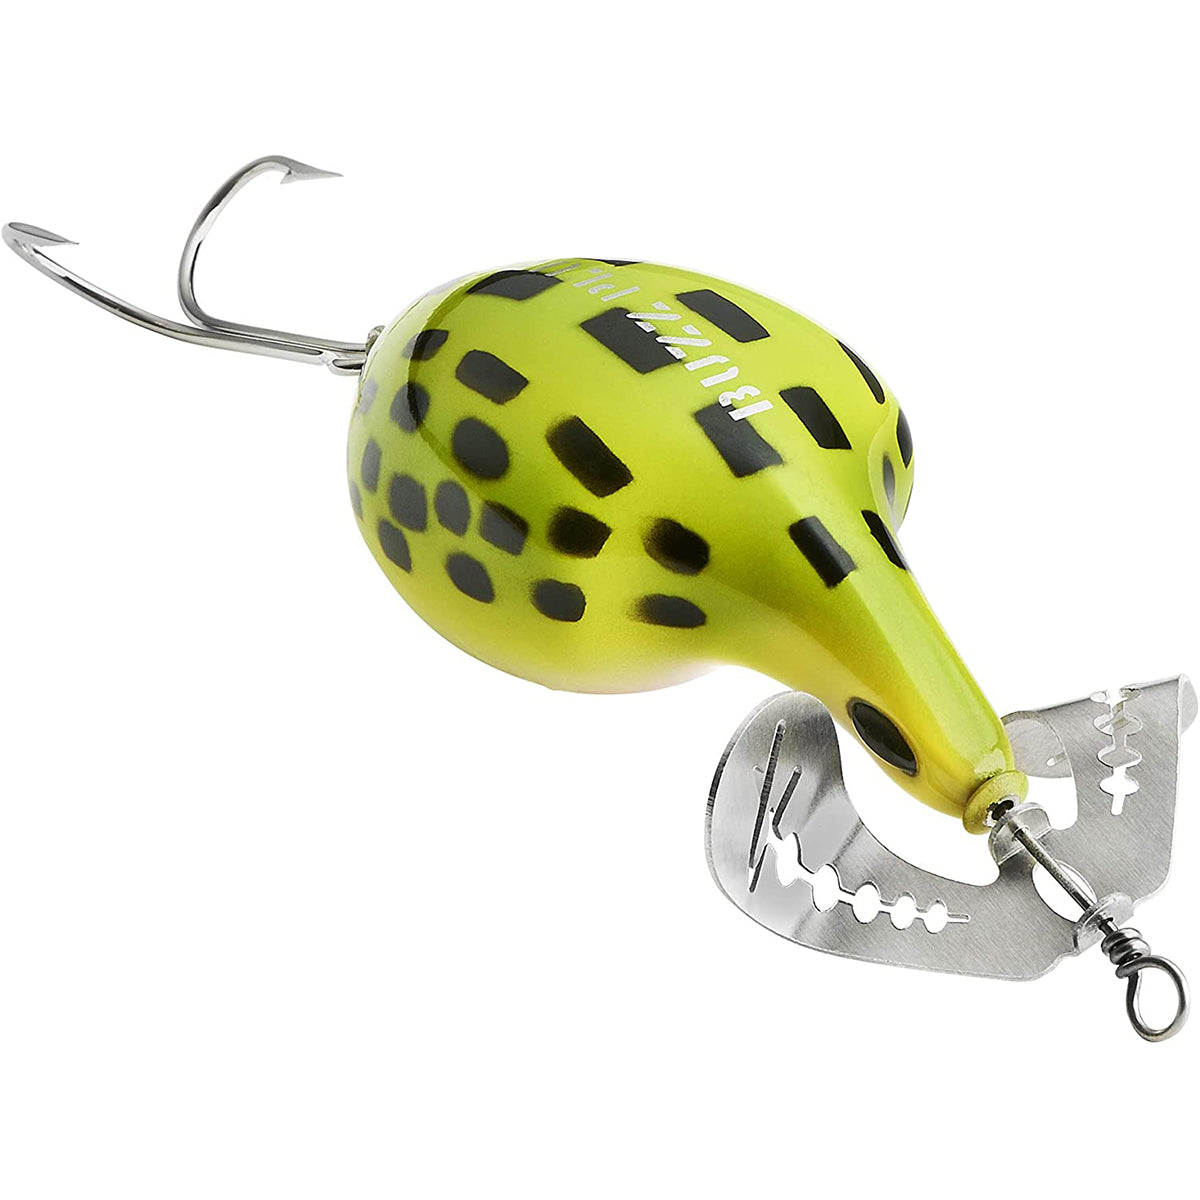 Arbogast Buzz Plug Jr. 5/8 oz. Topwater Fishing Lure - Frog/White Bell